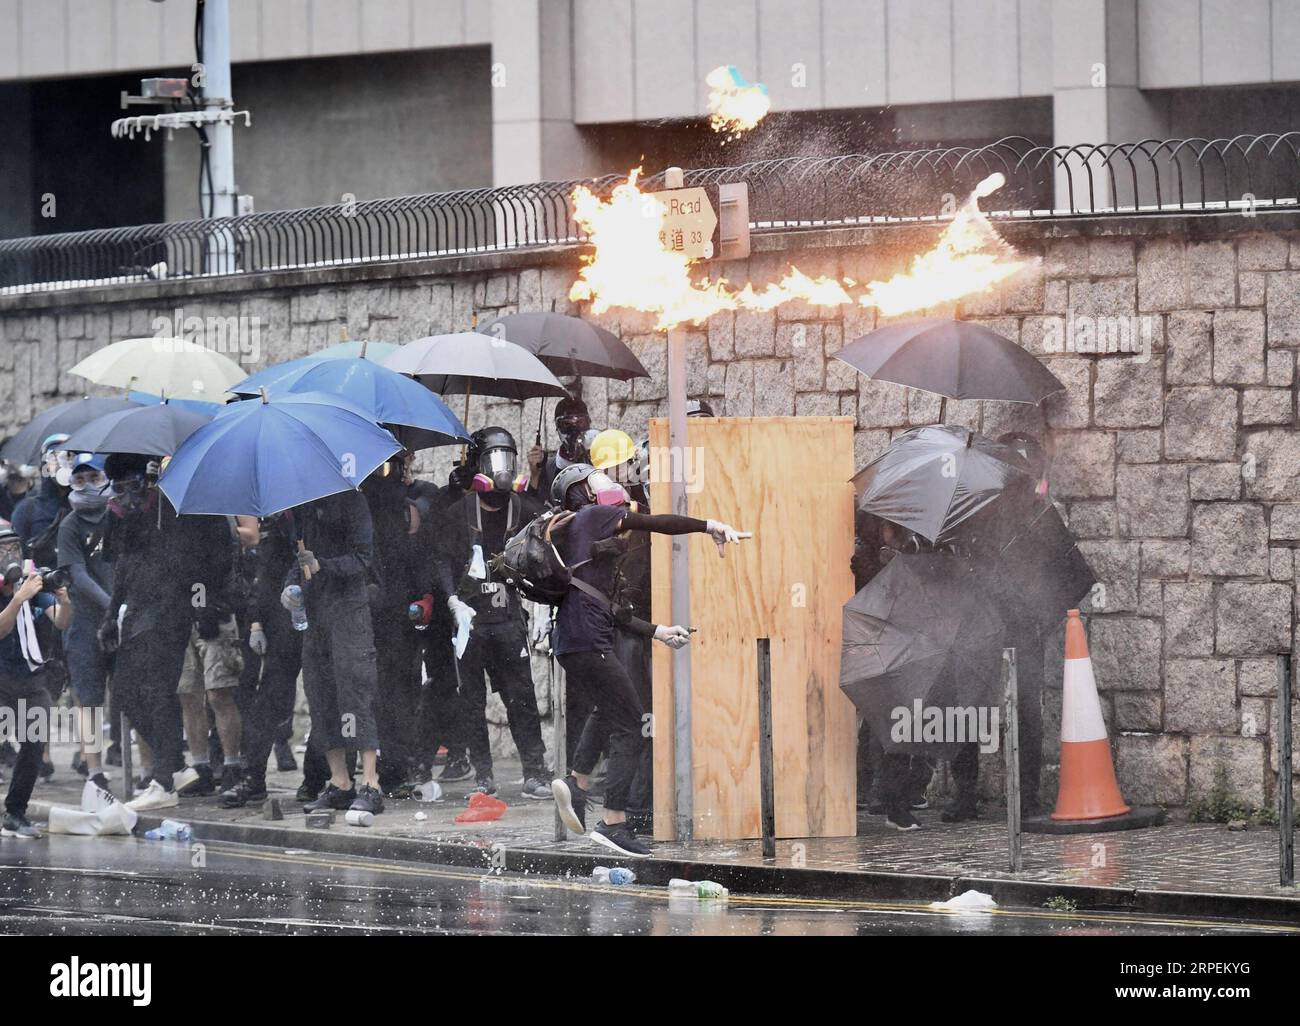 (190831) -- HONG KONG, Aug. 31, 2019 () -- Violent protesters throw petrol bombs at police officers in south China s Hong Kong, Aug. 31, 2019. () CHINA-HONG KONG-PROTEST-VIOLENCE (CN) Xinhua PUBLICATIONxNOTxINxCHN Stock Photo